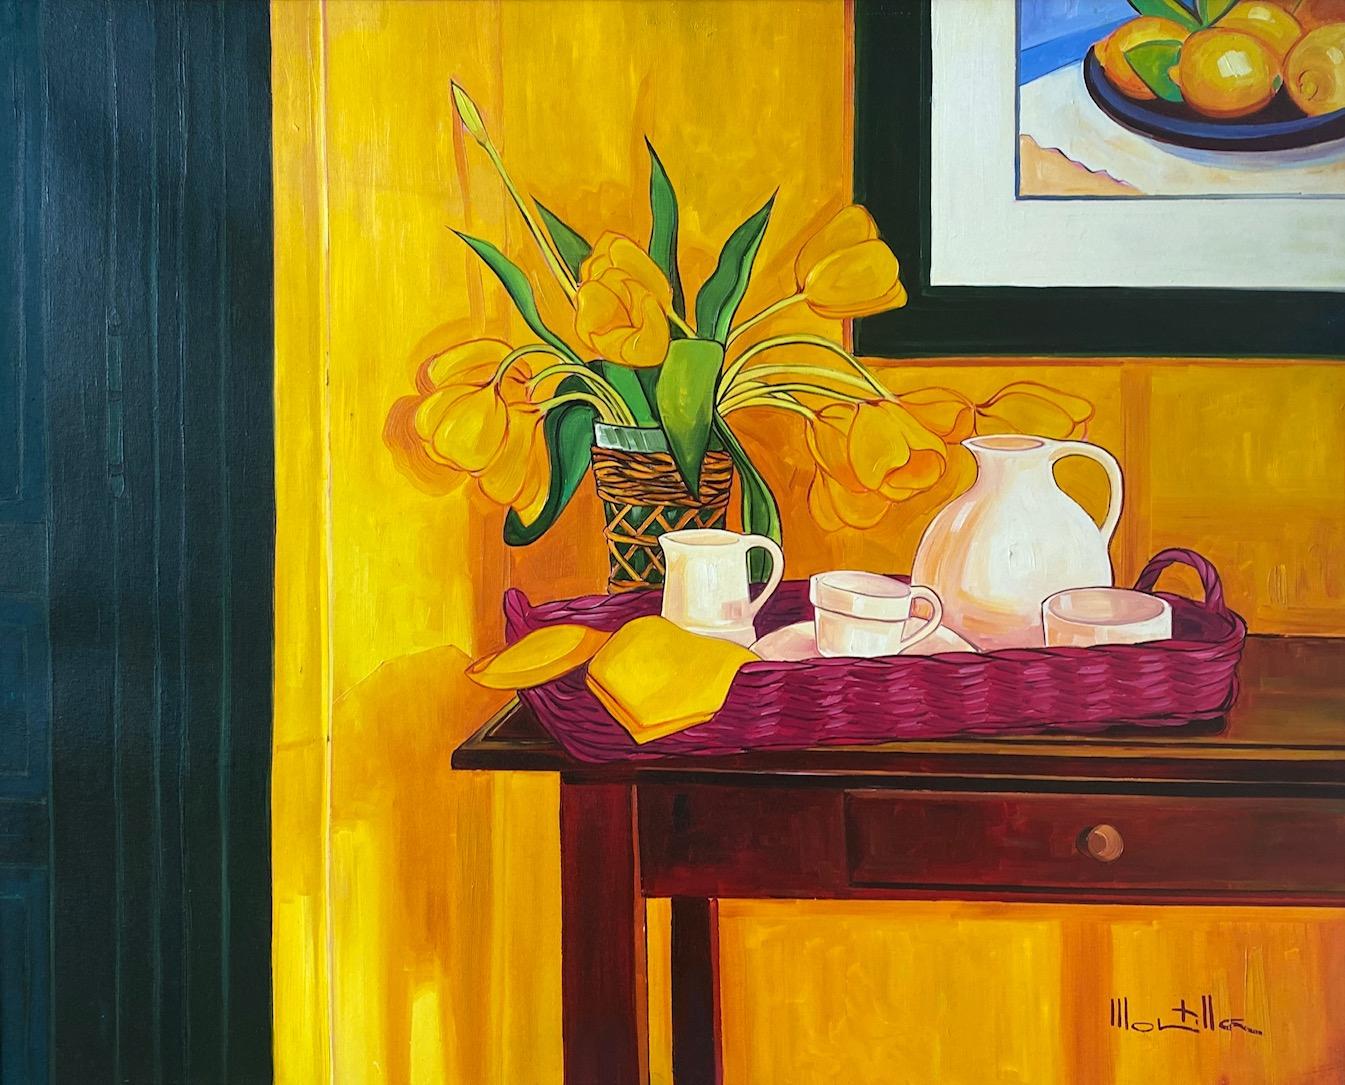 Yelow tulips. Colorful expressionist still-life: flowers, tea try. Oil on canvas - Expressionist Painting by Chico Montilla